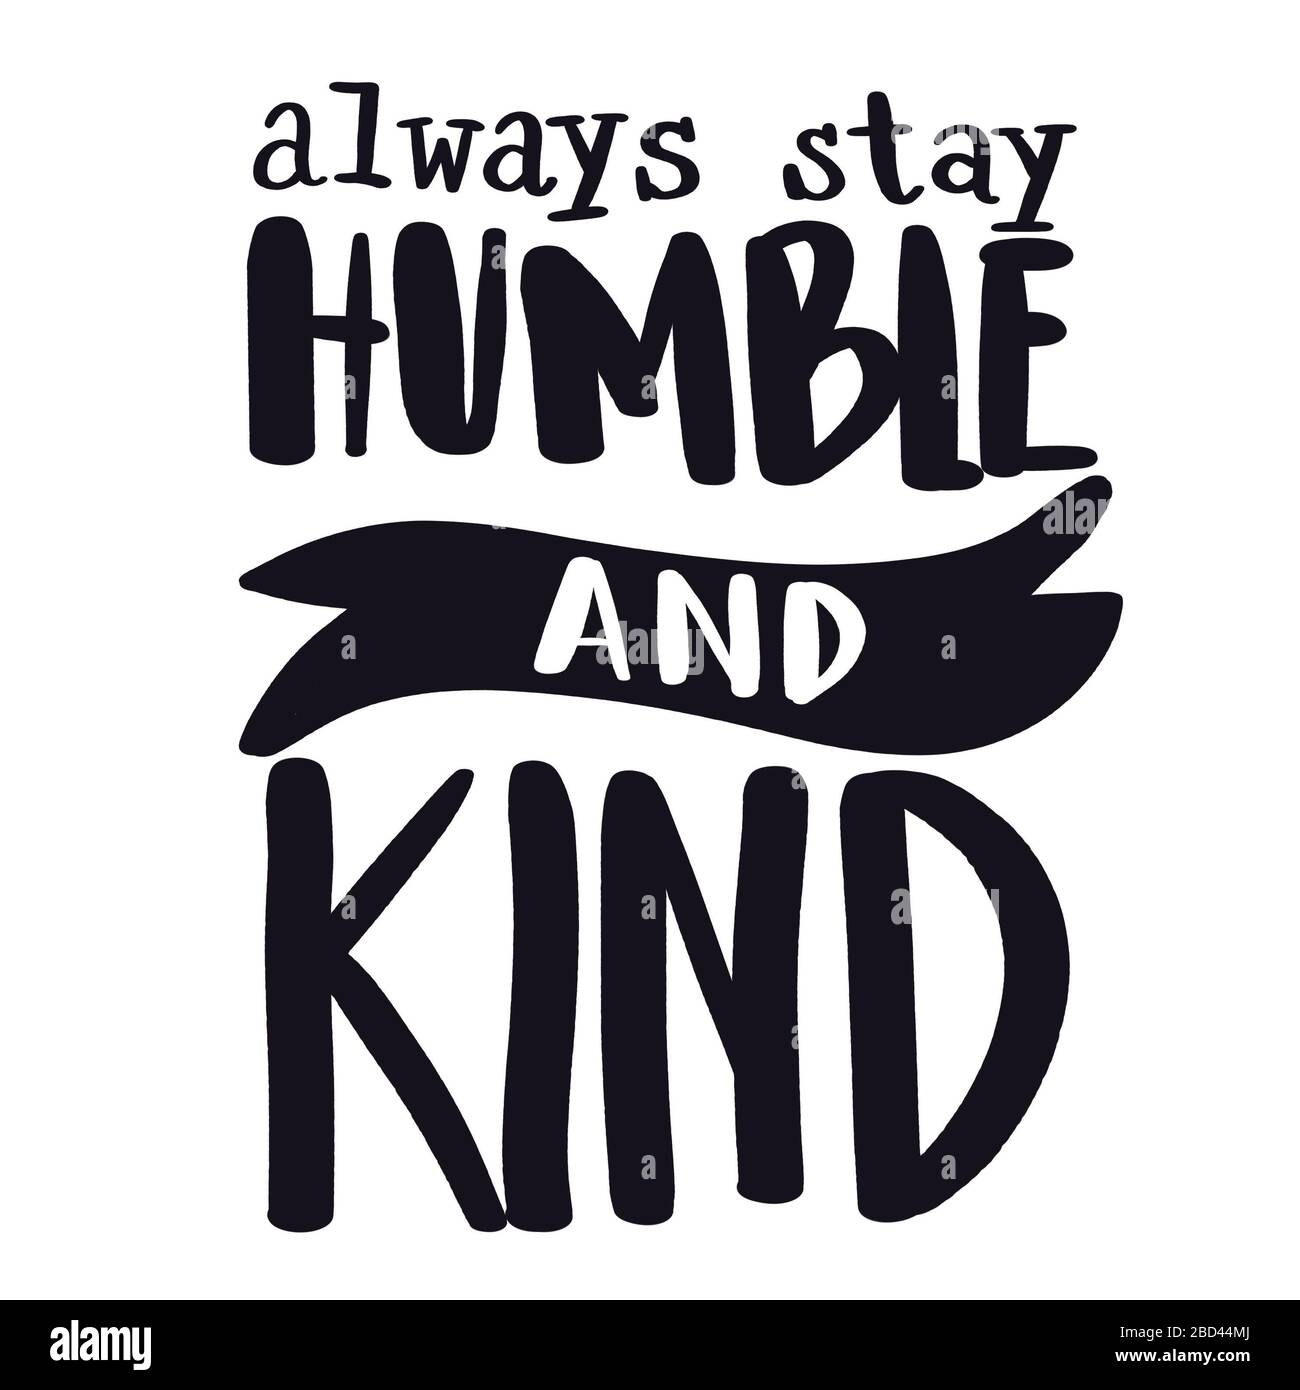 Inspirational Quote with White background - always stay humble and kind  Stock Photo